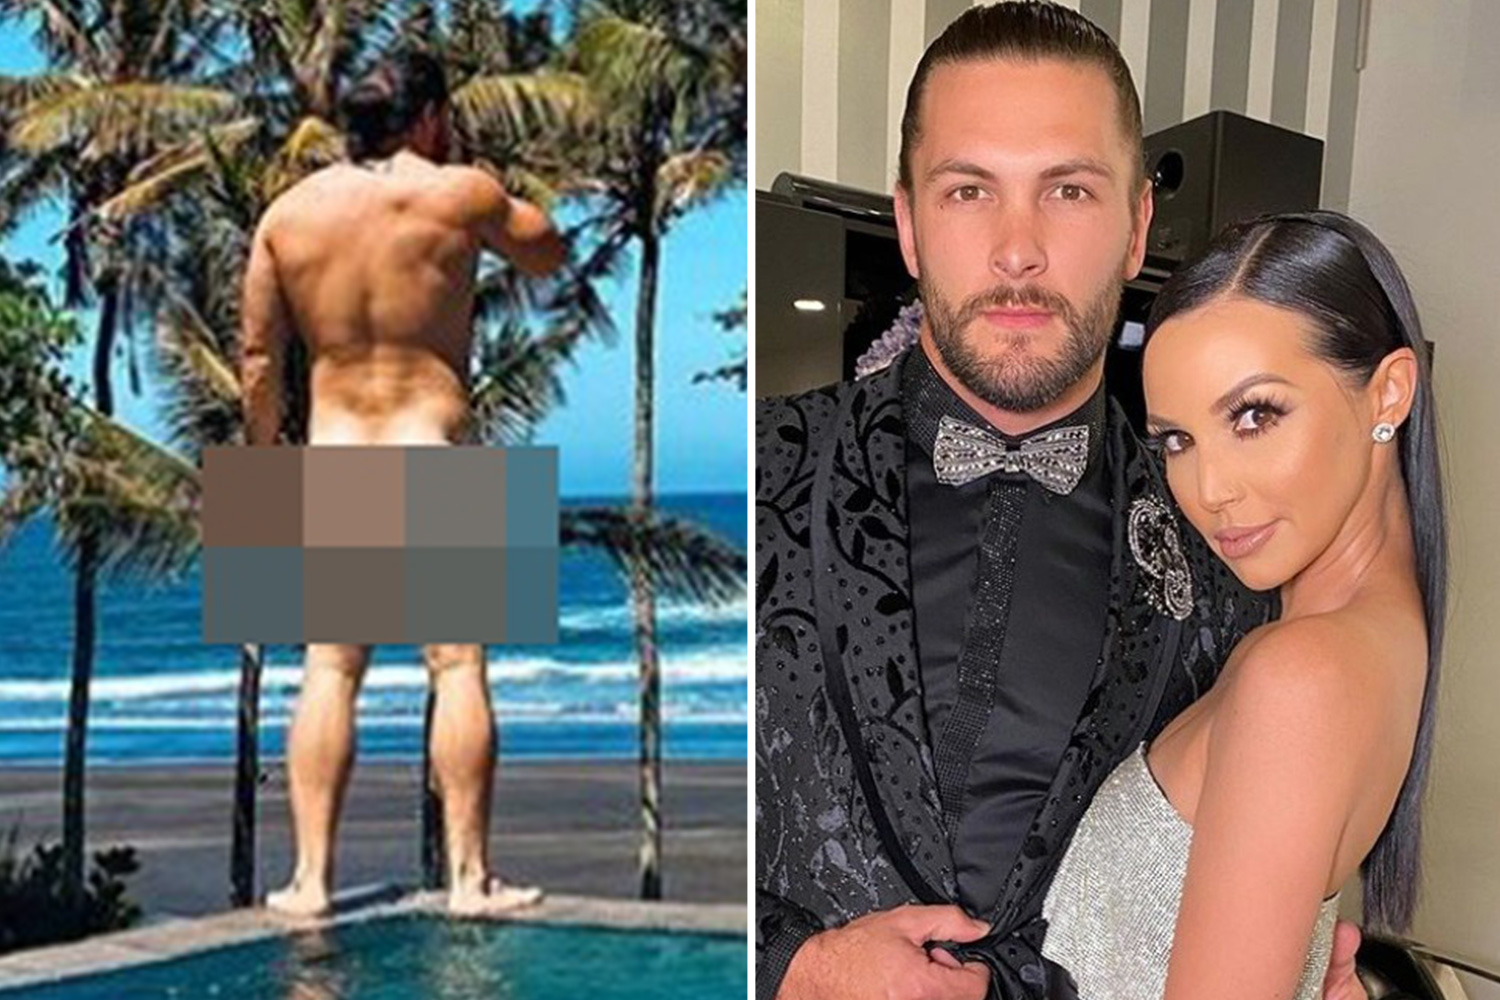 alfred wyse recommends vanderpump rules nudes pic